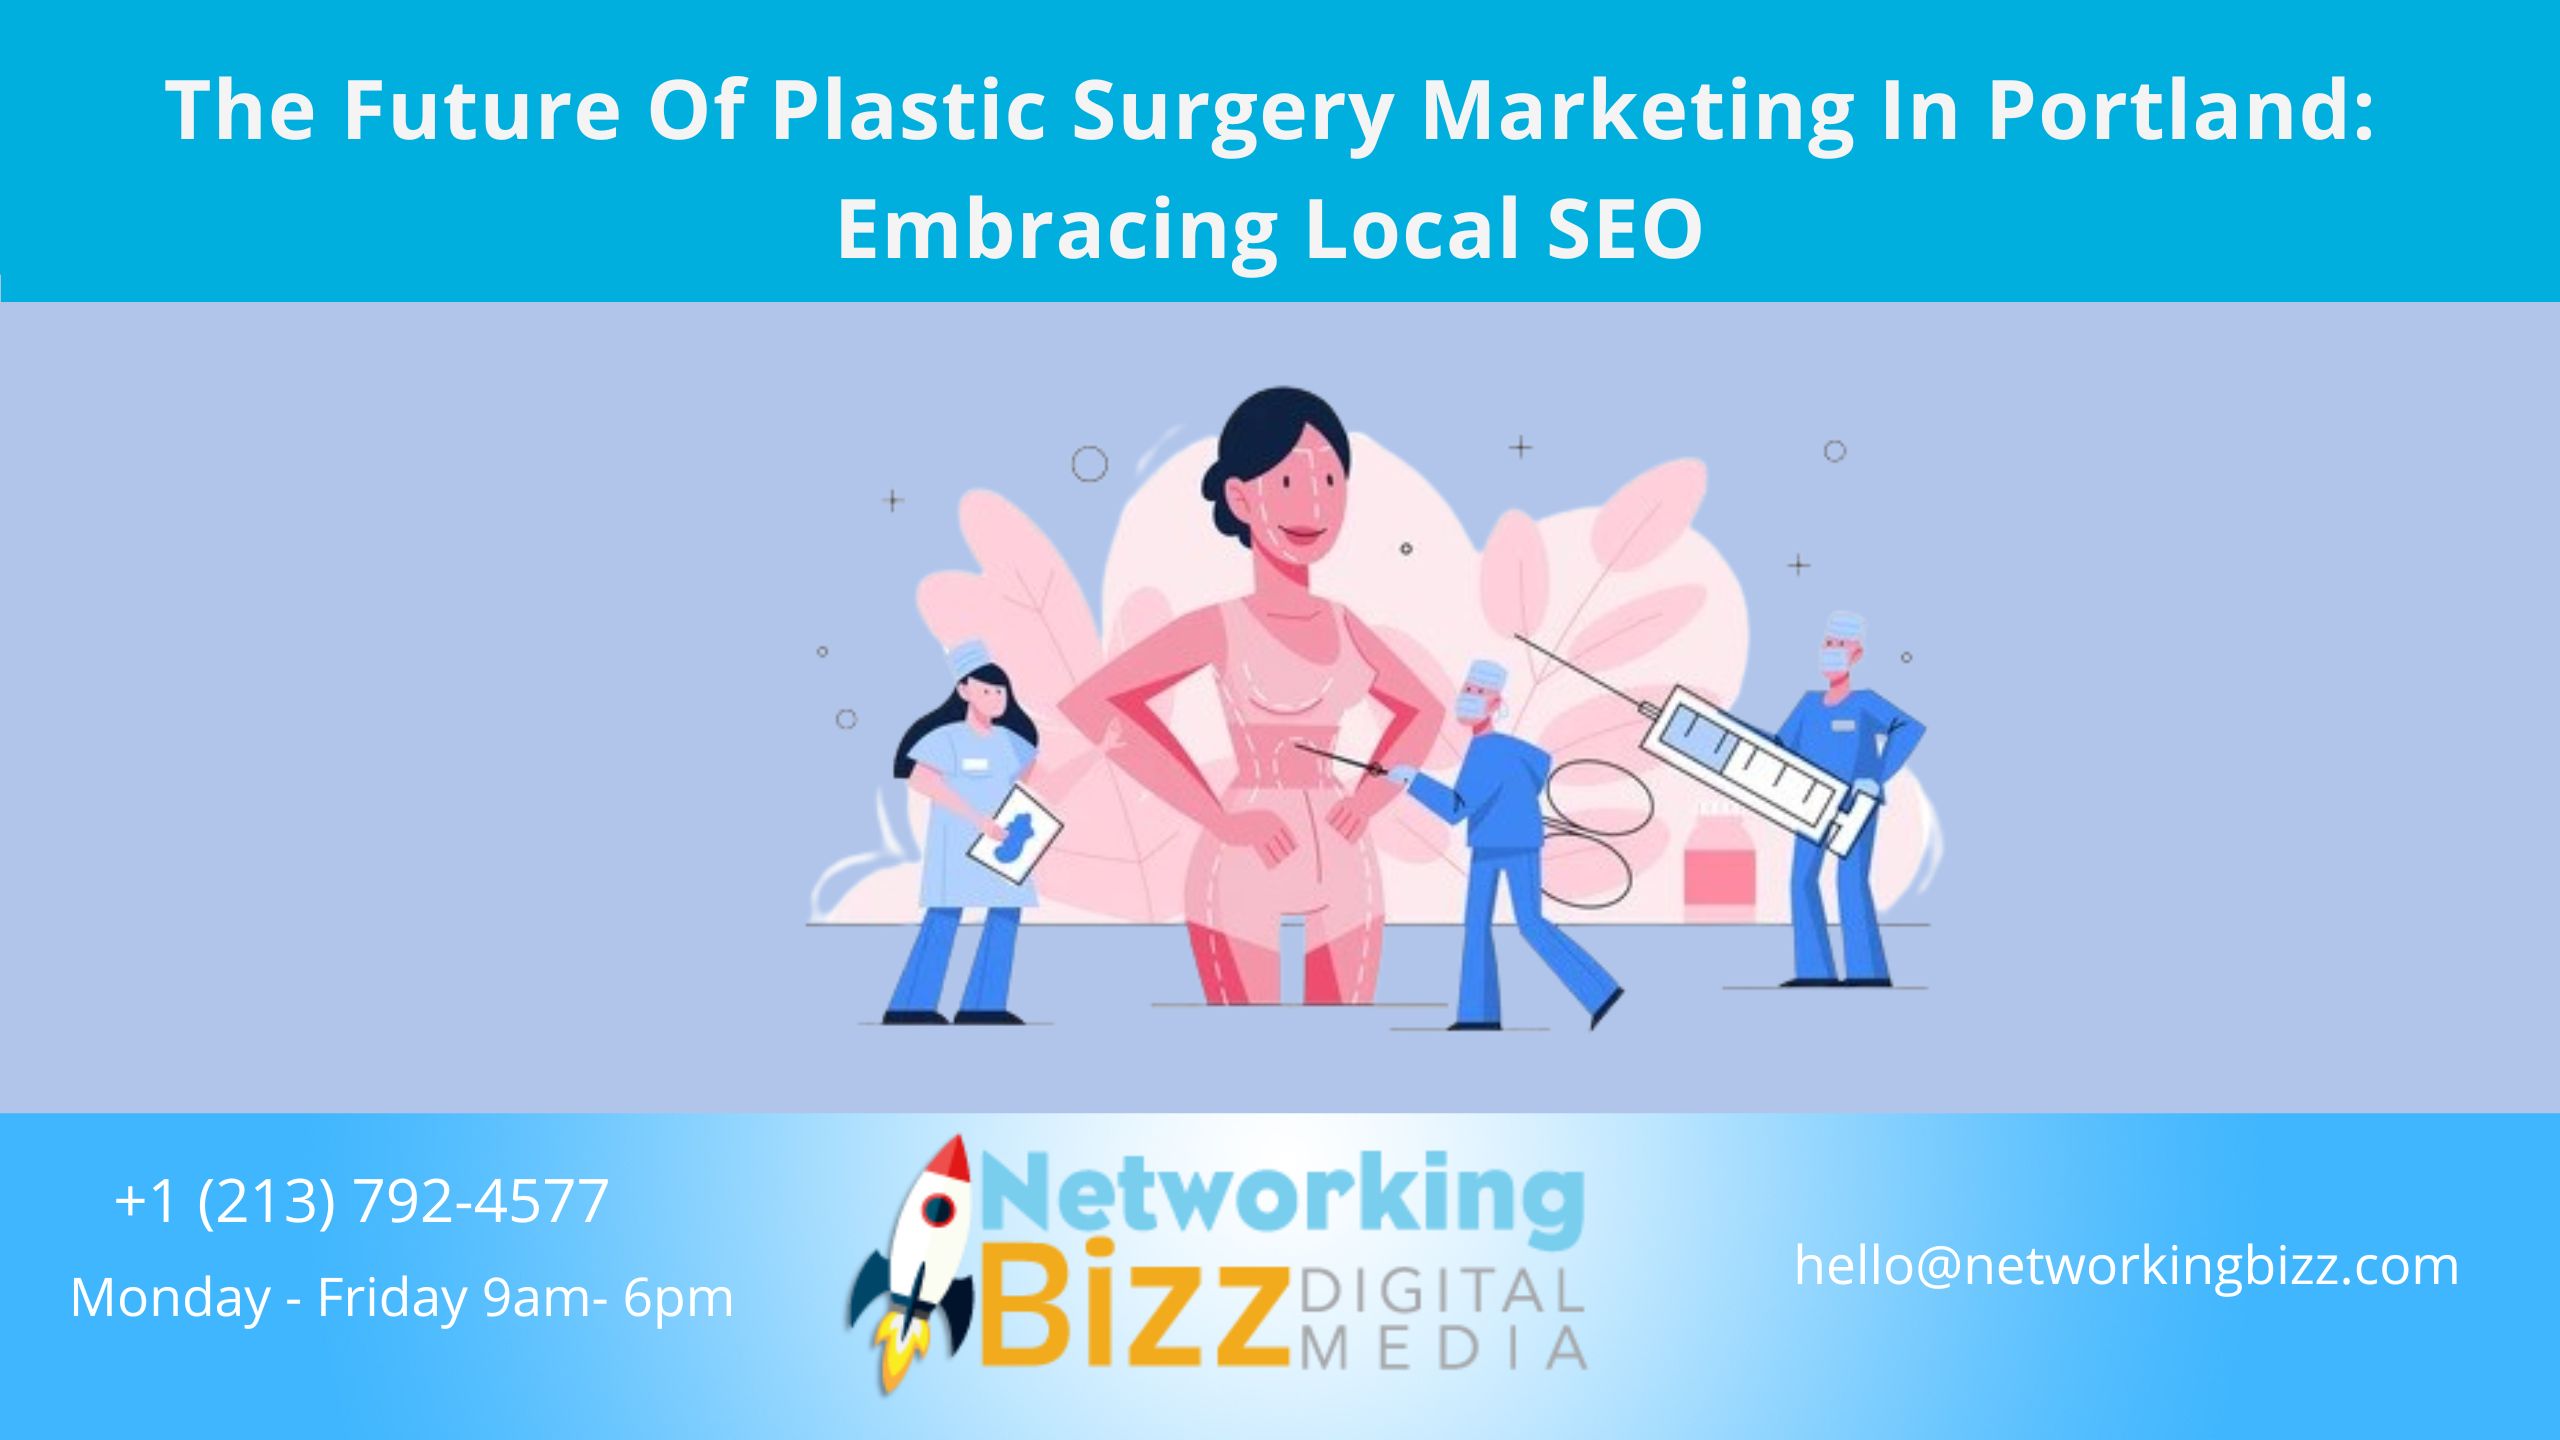 The Future Of Plastic Surgery Marketing In Portland: Embracing Local SEO